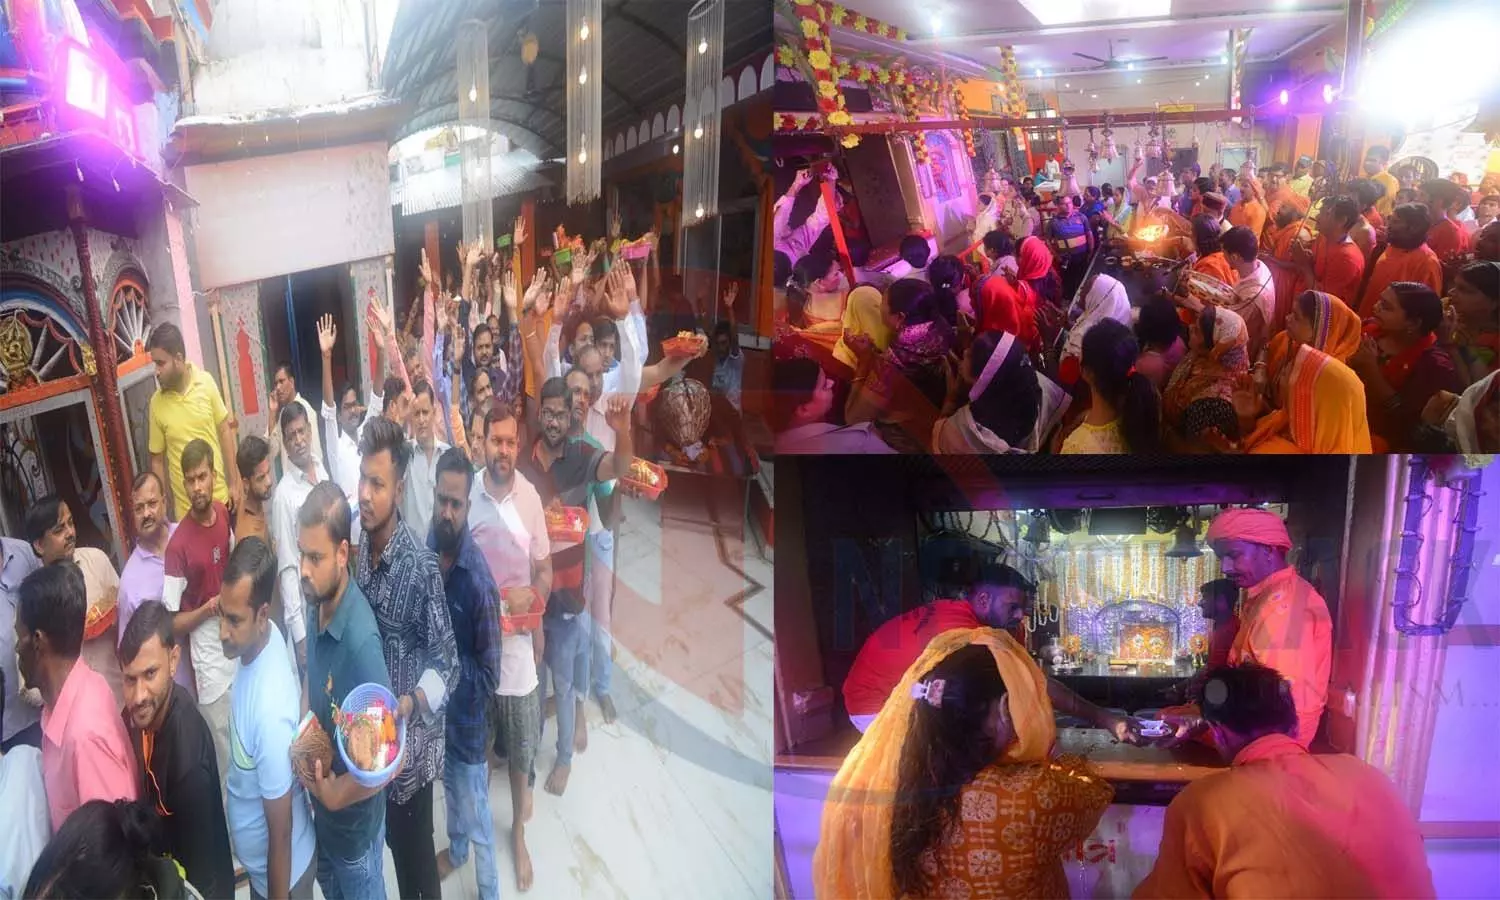 Mothers cheers in Badi Kali ji temple located in Chowk, Lucknow, crowd of devotees gathered on the first day of Navratri